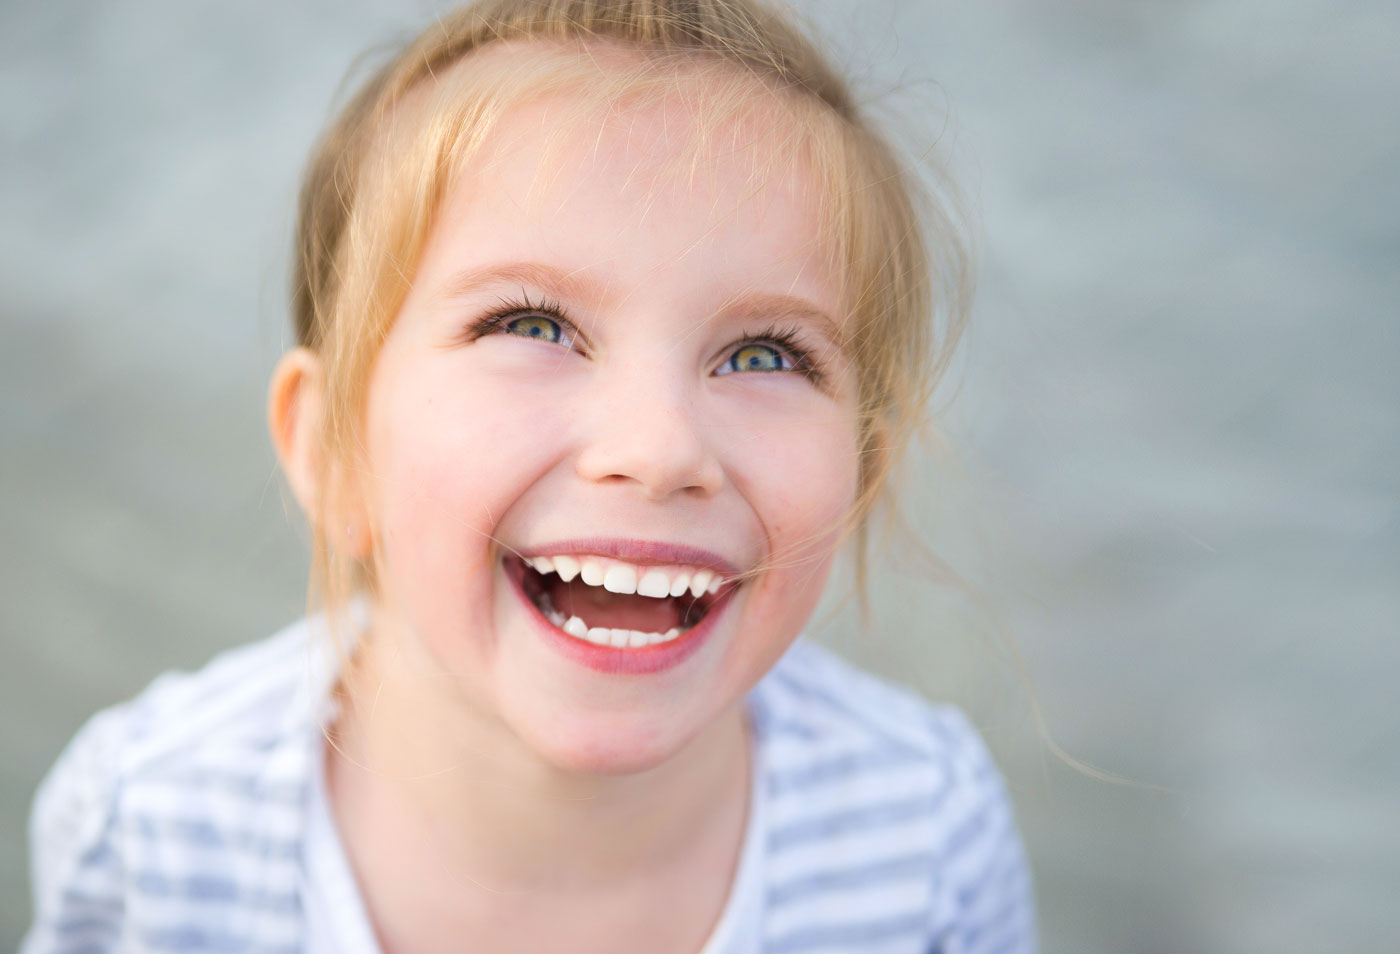 A young girl smiling showing her healthy teeth.